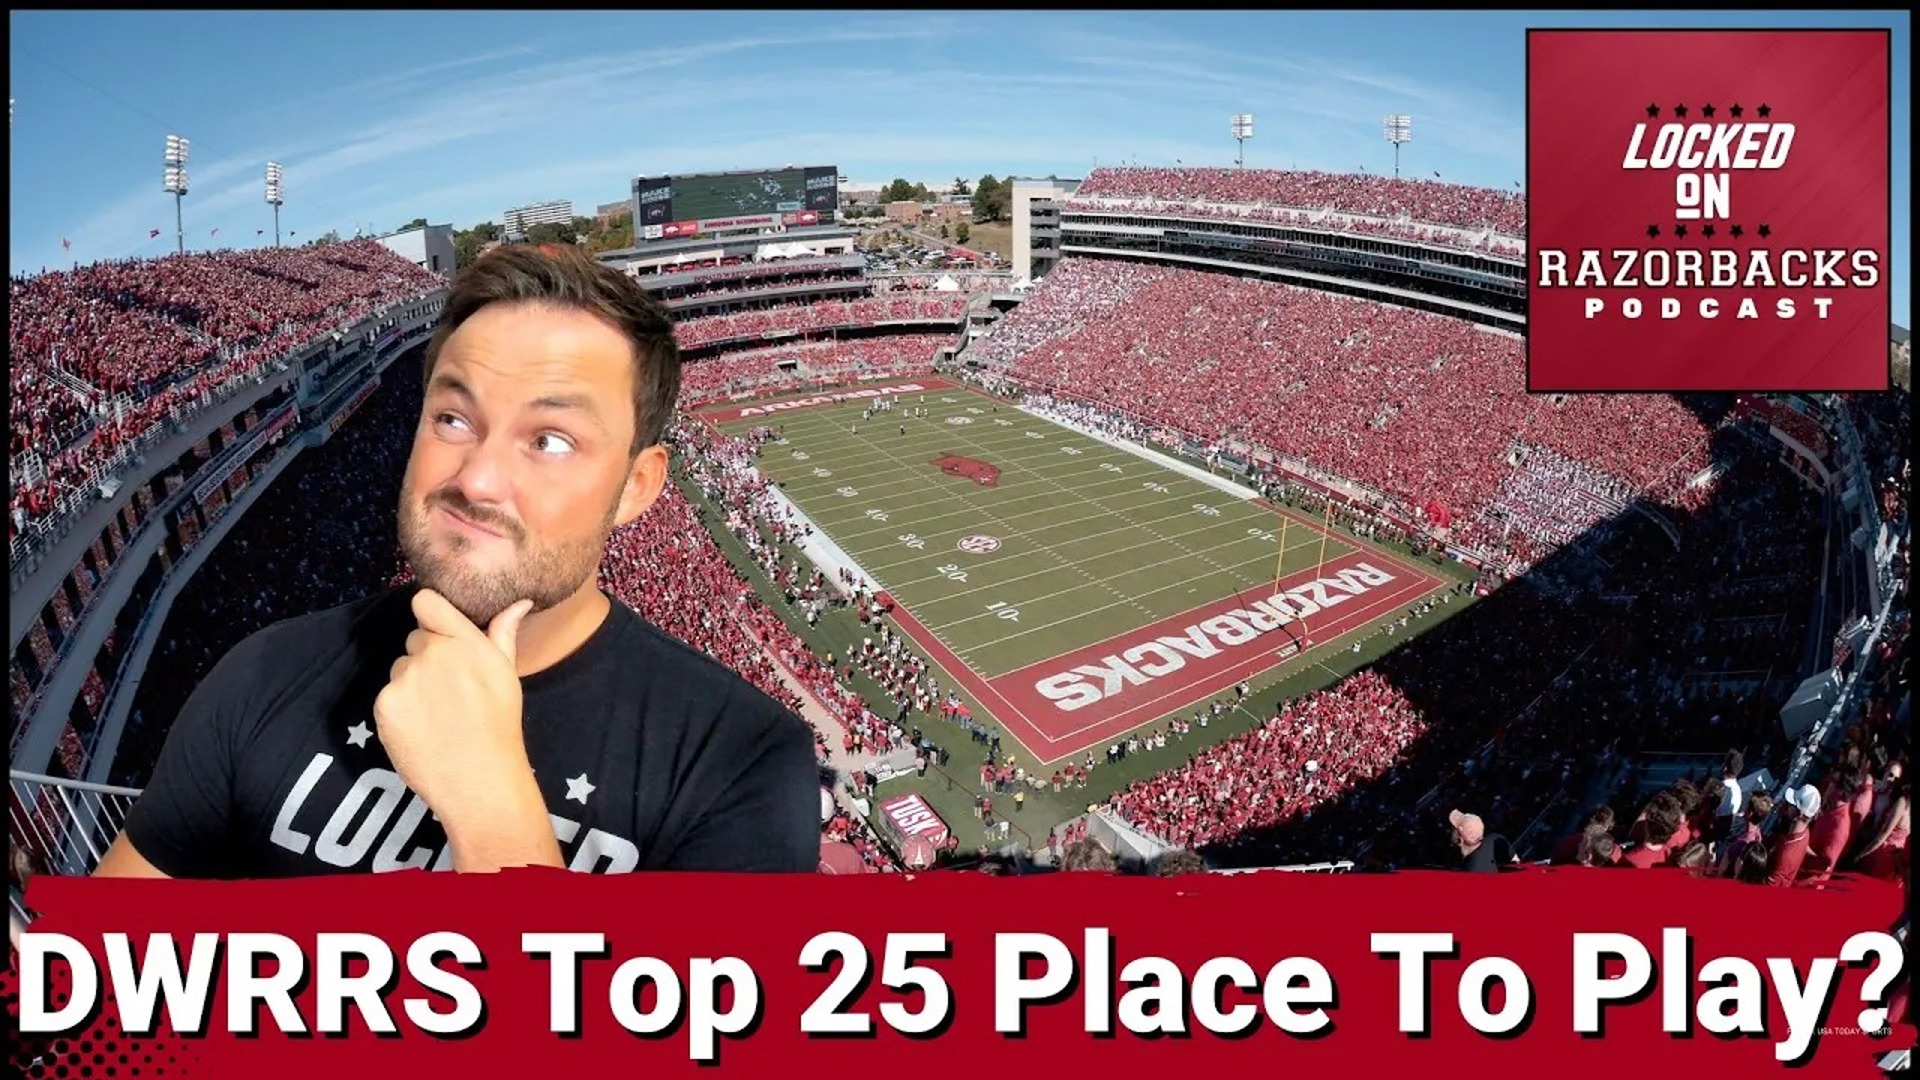 EA Sports College Football has Arkansas as one of the Top 25 Toughest Places to Play in their new game. Is DWRRS actually worthy of that list?